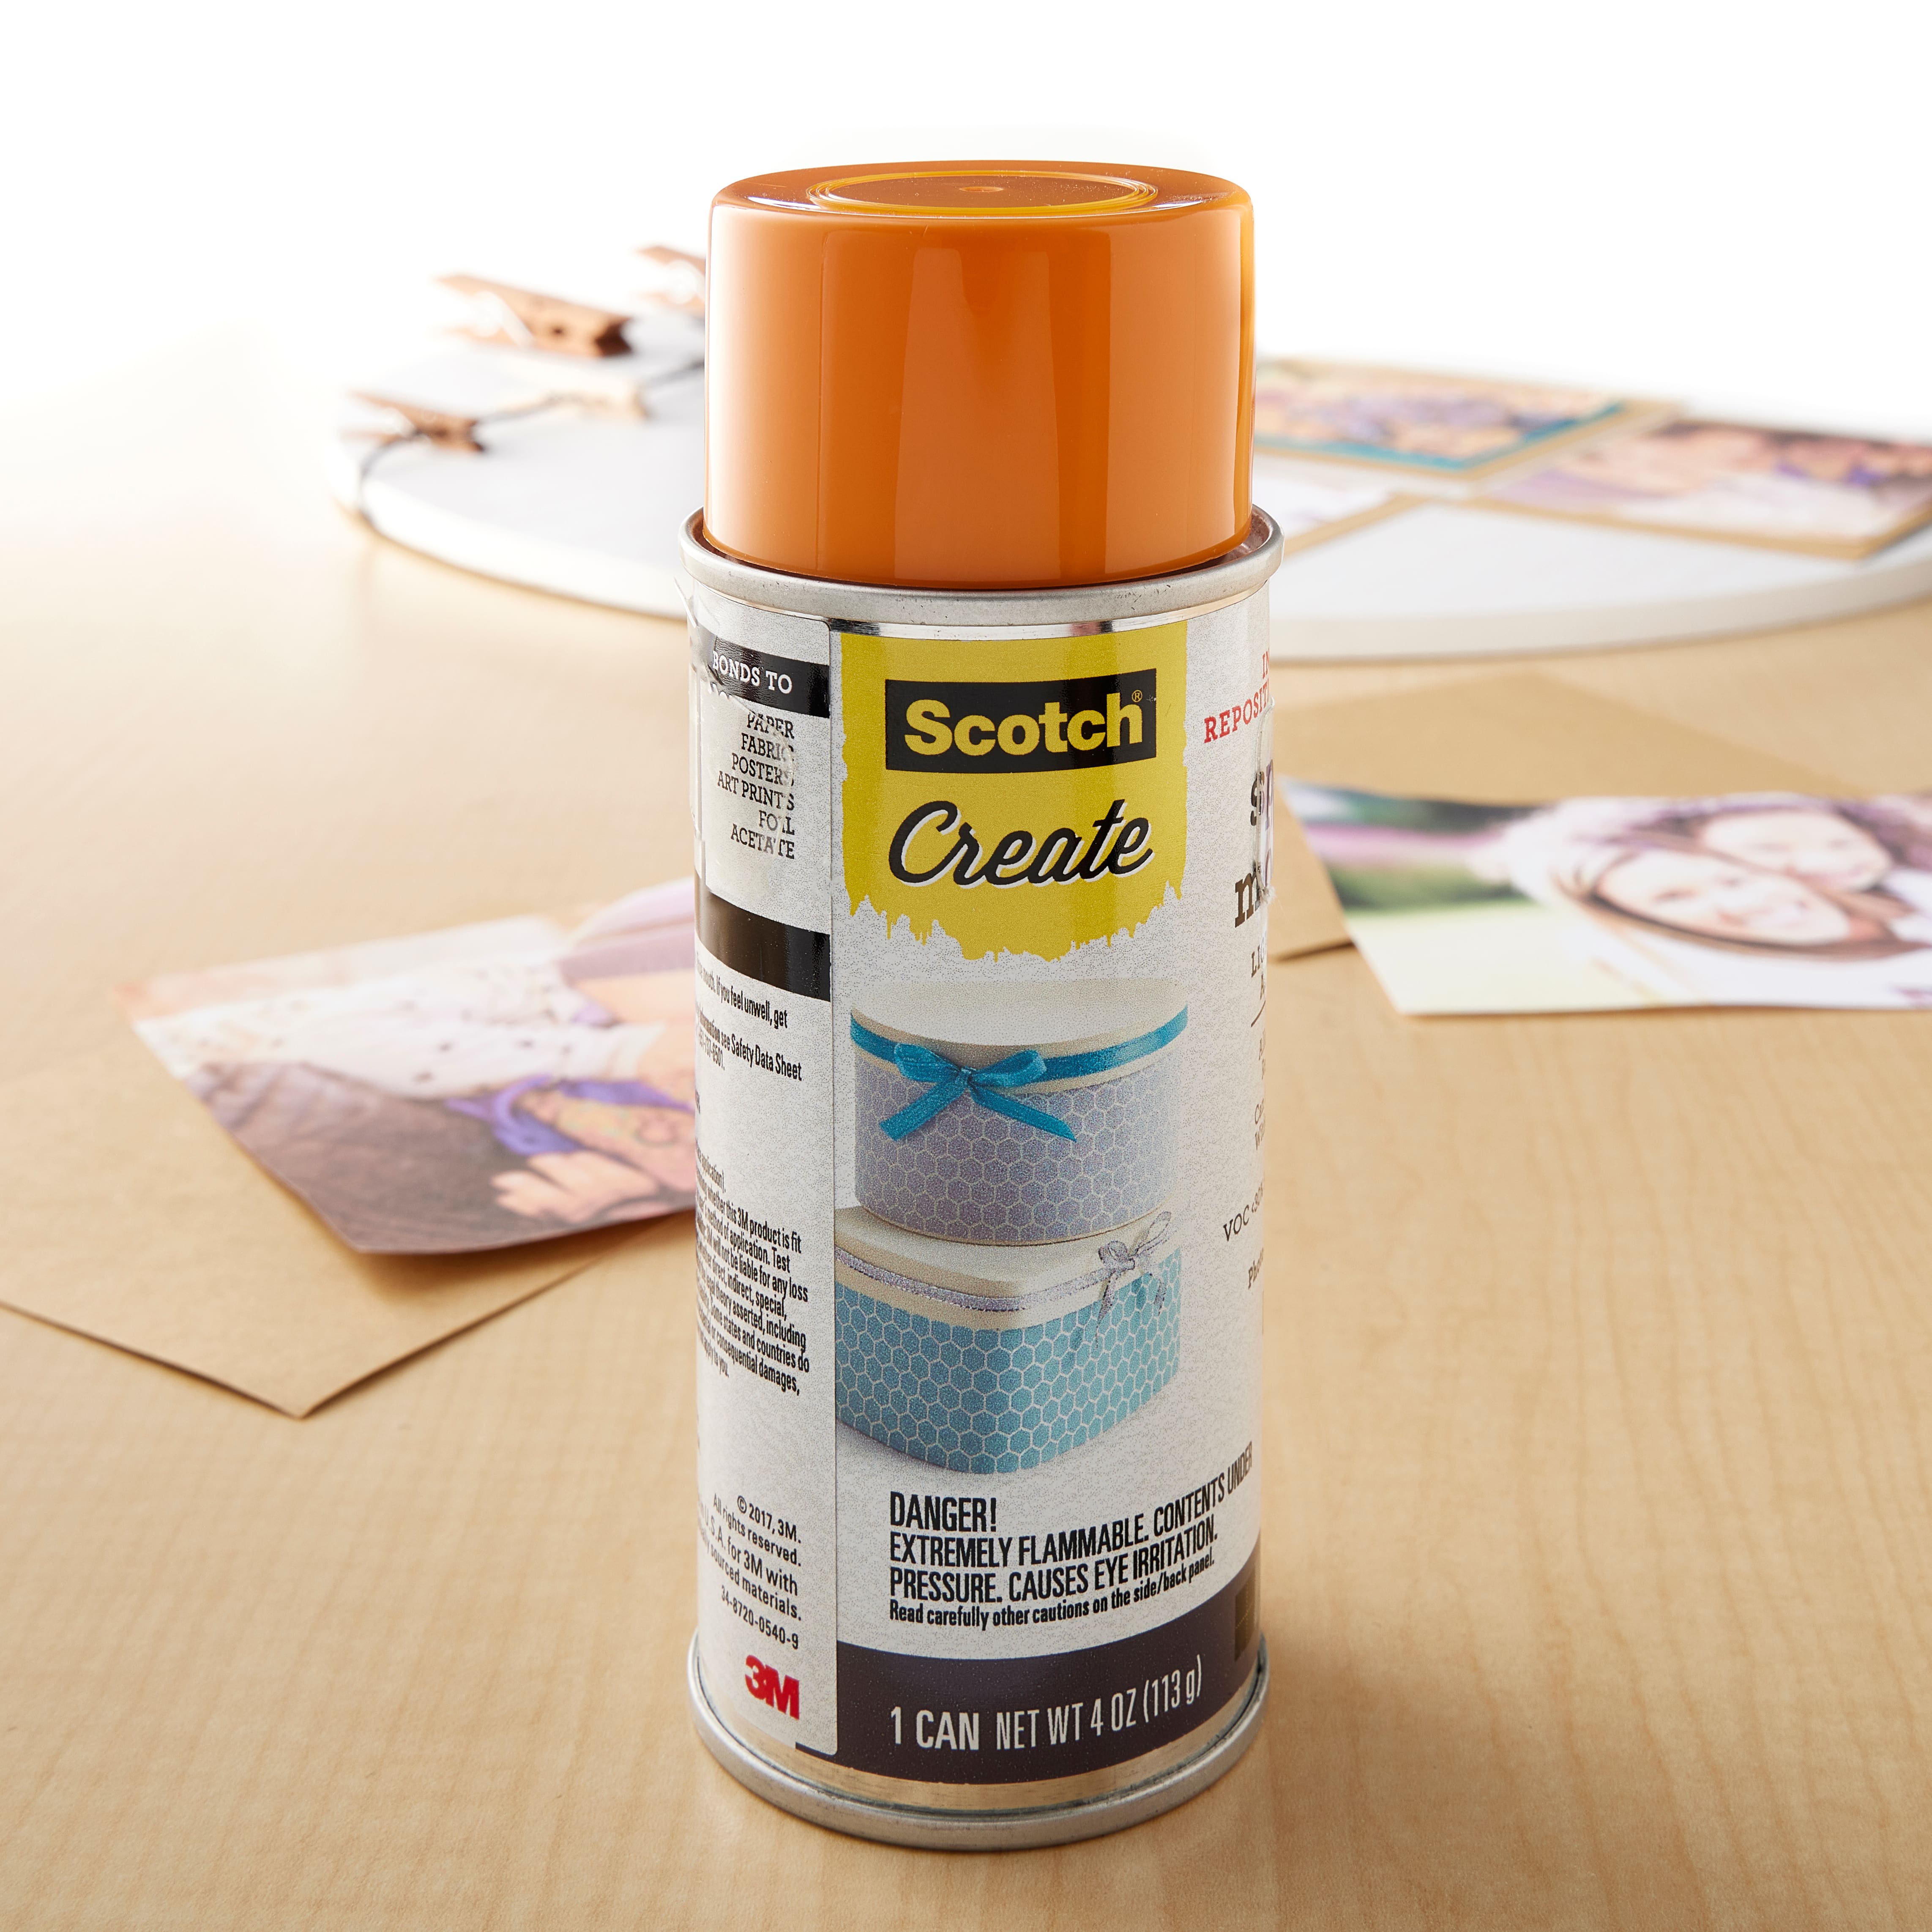 12 Pack: 3M&#xAE; Spray Mount&#x2122; Repositionable Adhesive